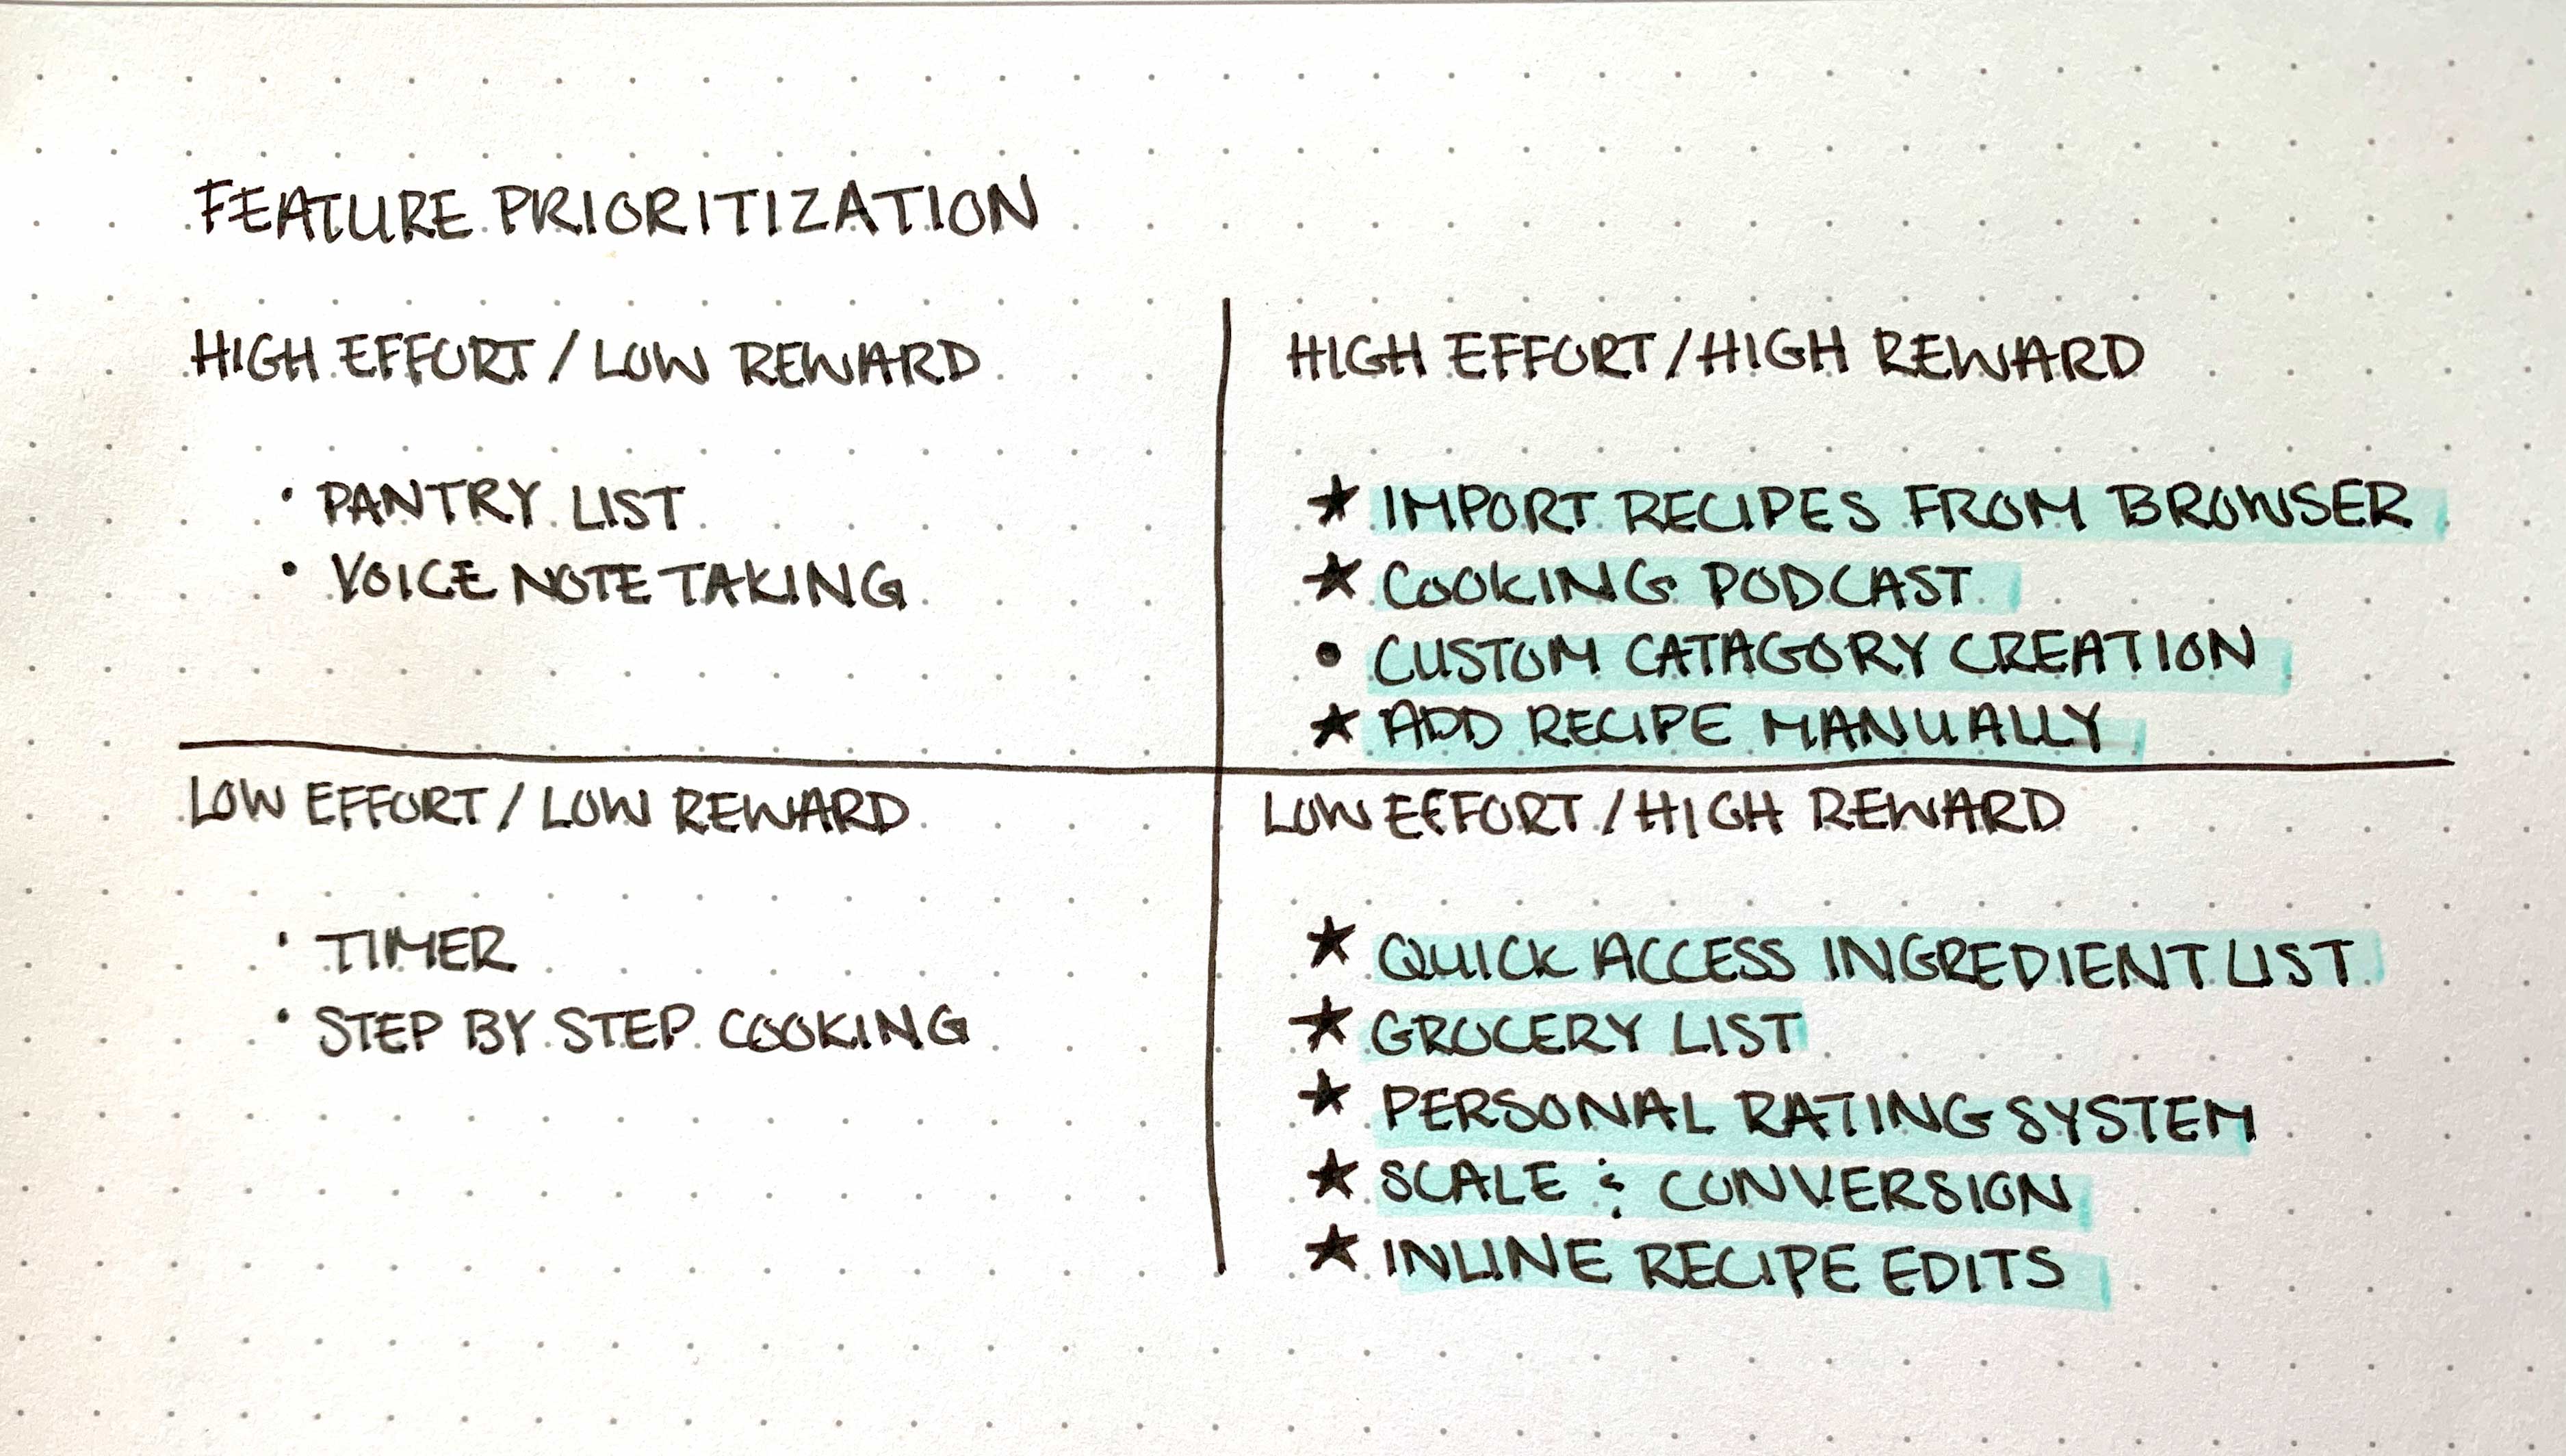 Feature Prioritization highlighting areas to move forward in. This list consists of importing recipes from the browser, podcast cooking, adding recipes manually, having a quick access ingredient list, grocery list, personal rating system, measurement conversion, and inline recipe edits. If there's extra time, having custom category creation would be nice to have.